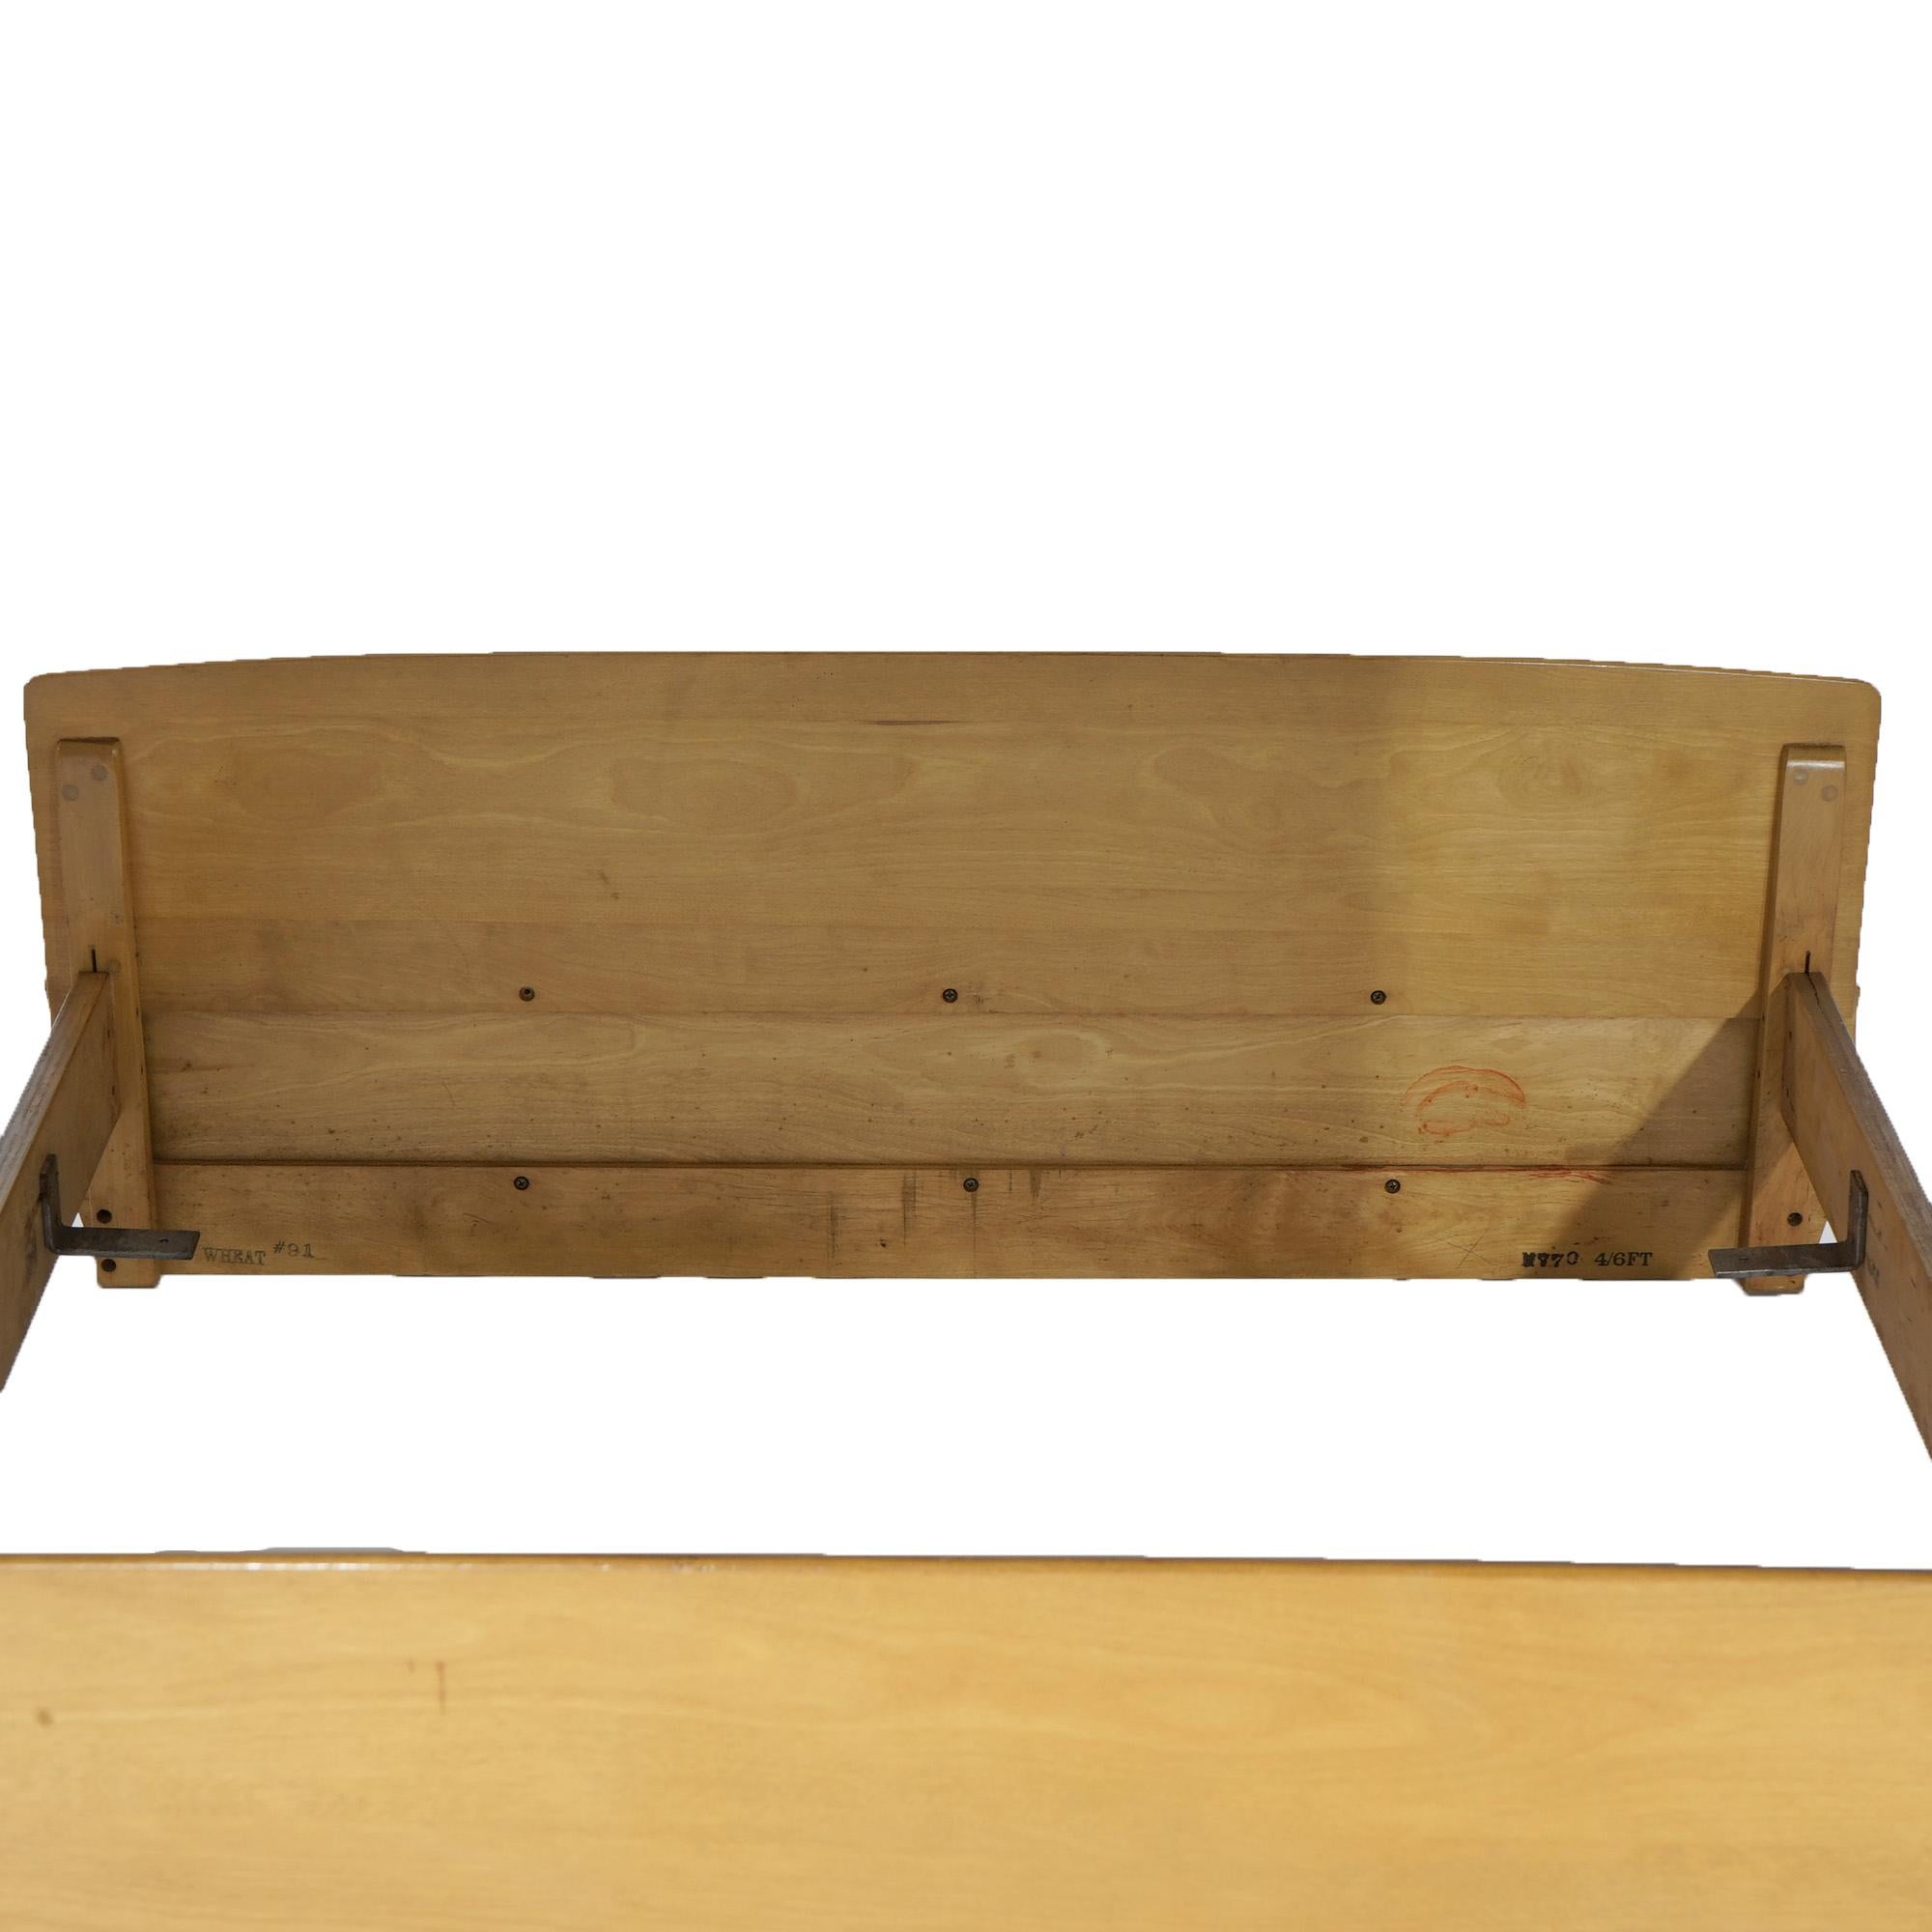 Birch Mid-Century Modern Heywood Wakefield Double Bed, Wheat Finish, circa 1950 For Sale